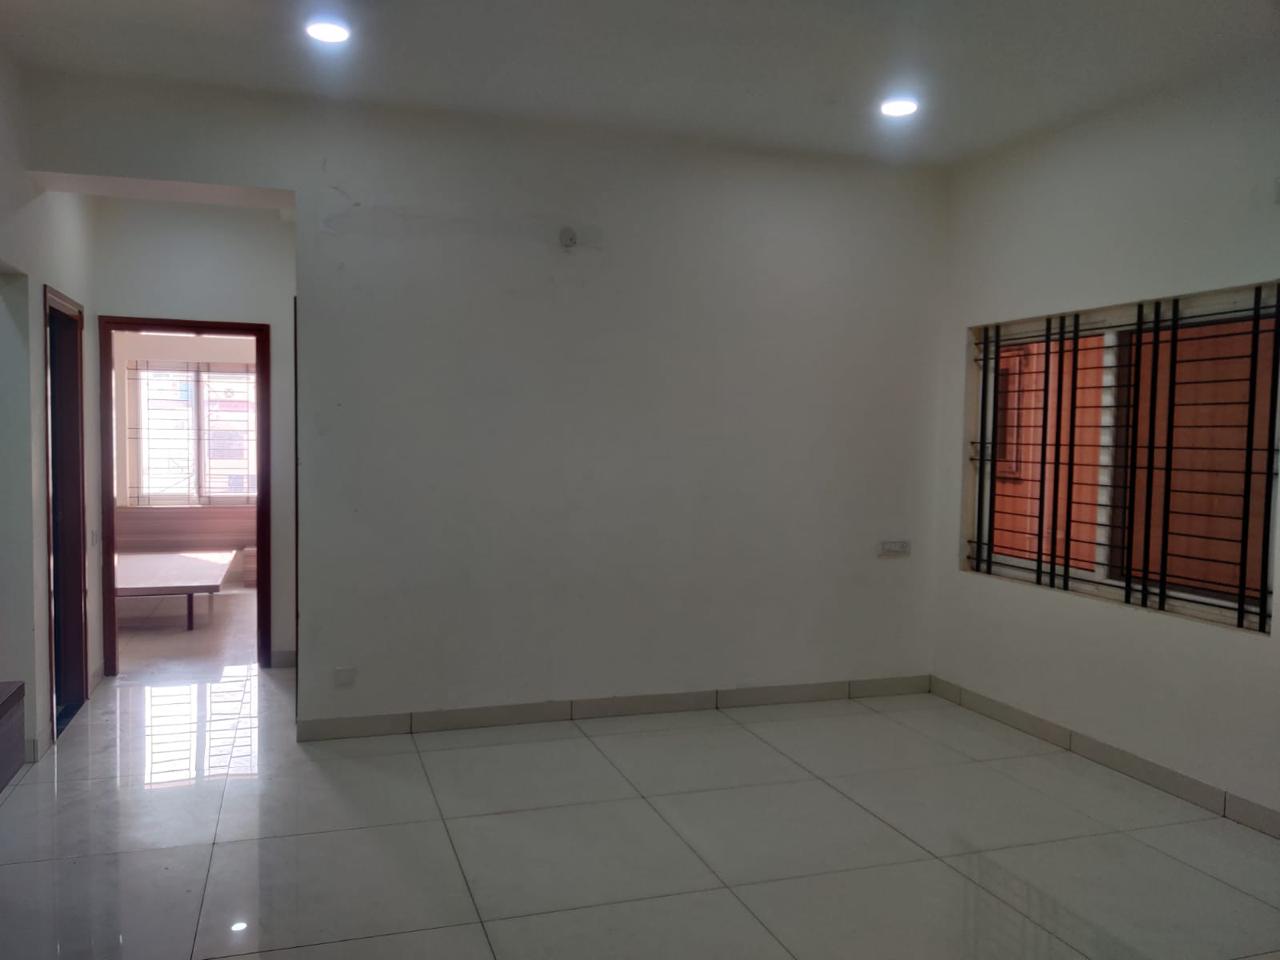 2 BHK Residential Apartment for Lease Only at JAM-6790 in Ramamurthy Nagar